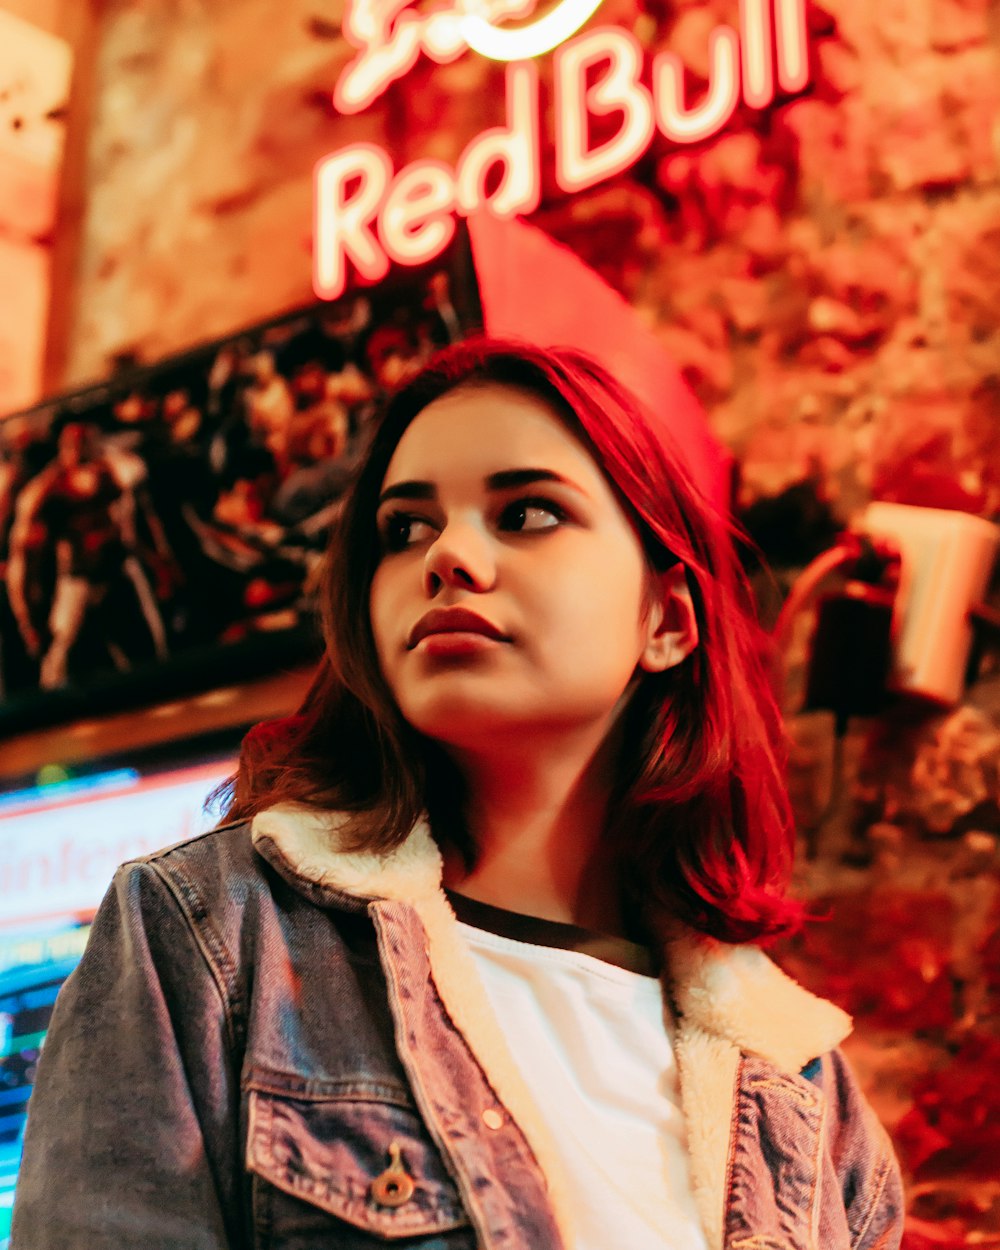 woman wearing blue denim jacket standing near the Red Bull neon light signage